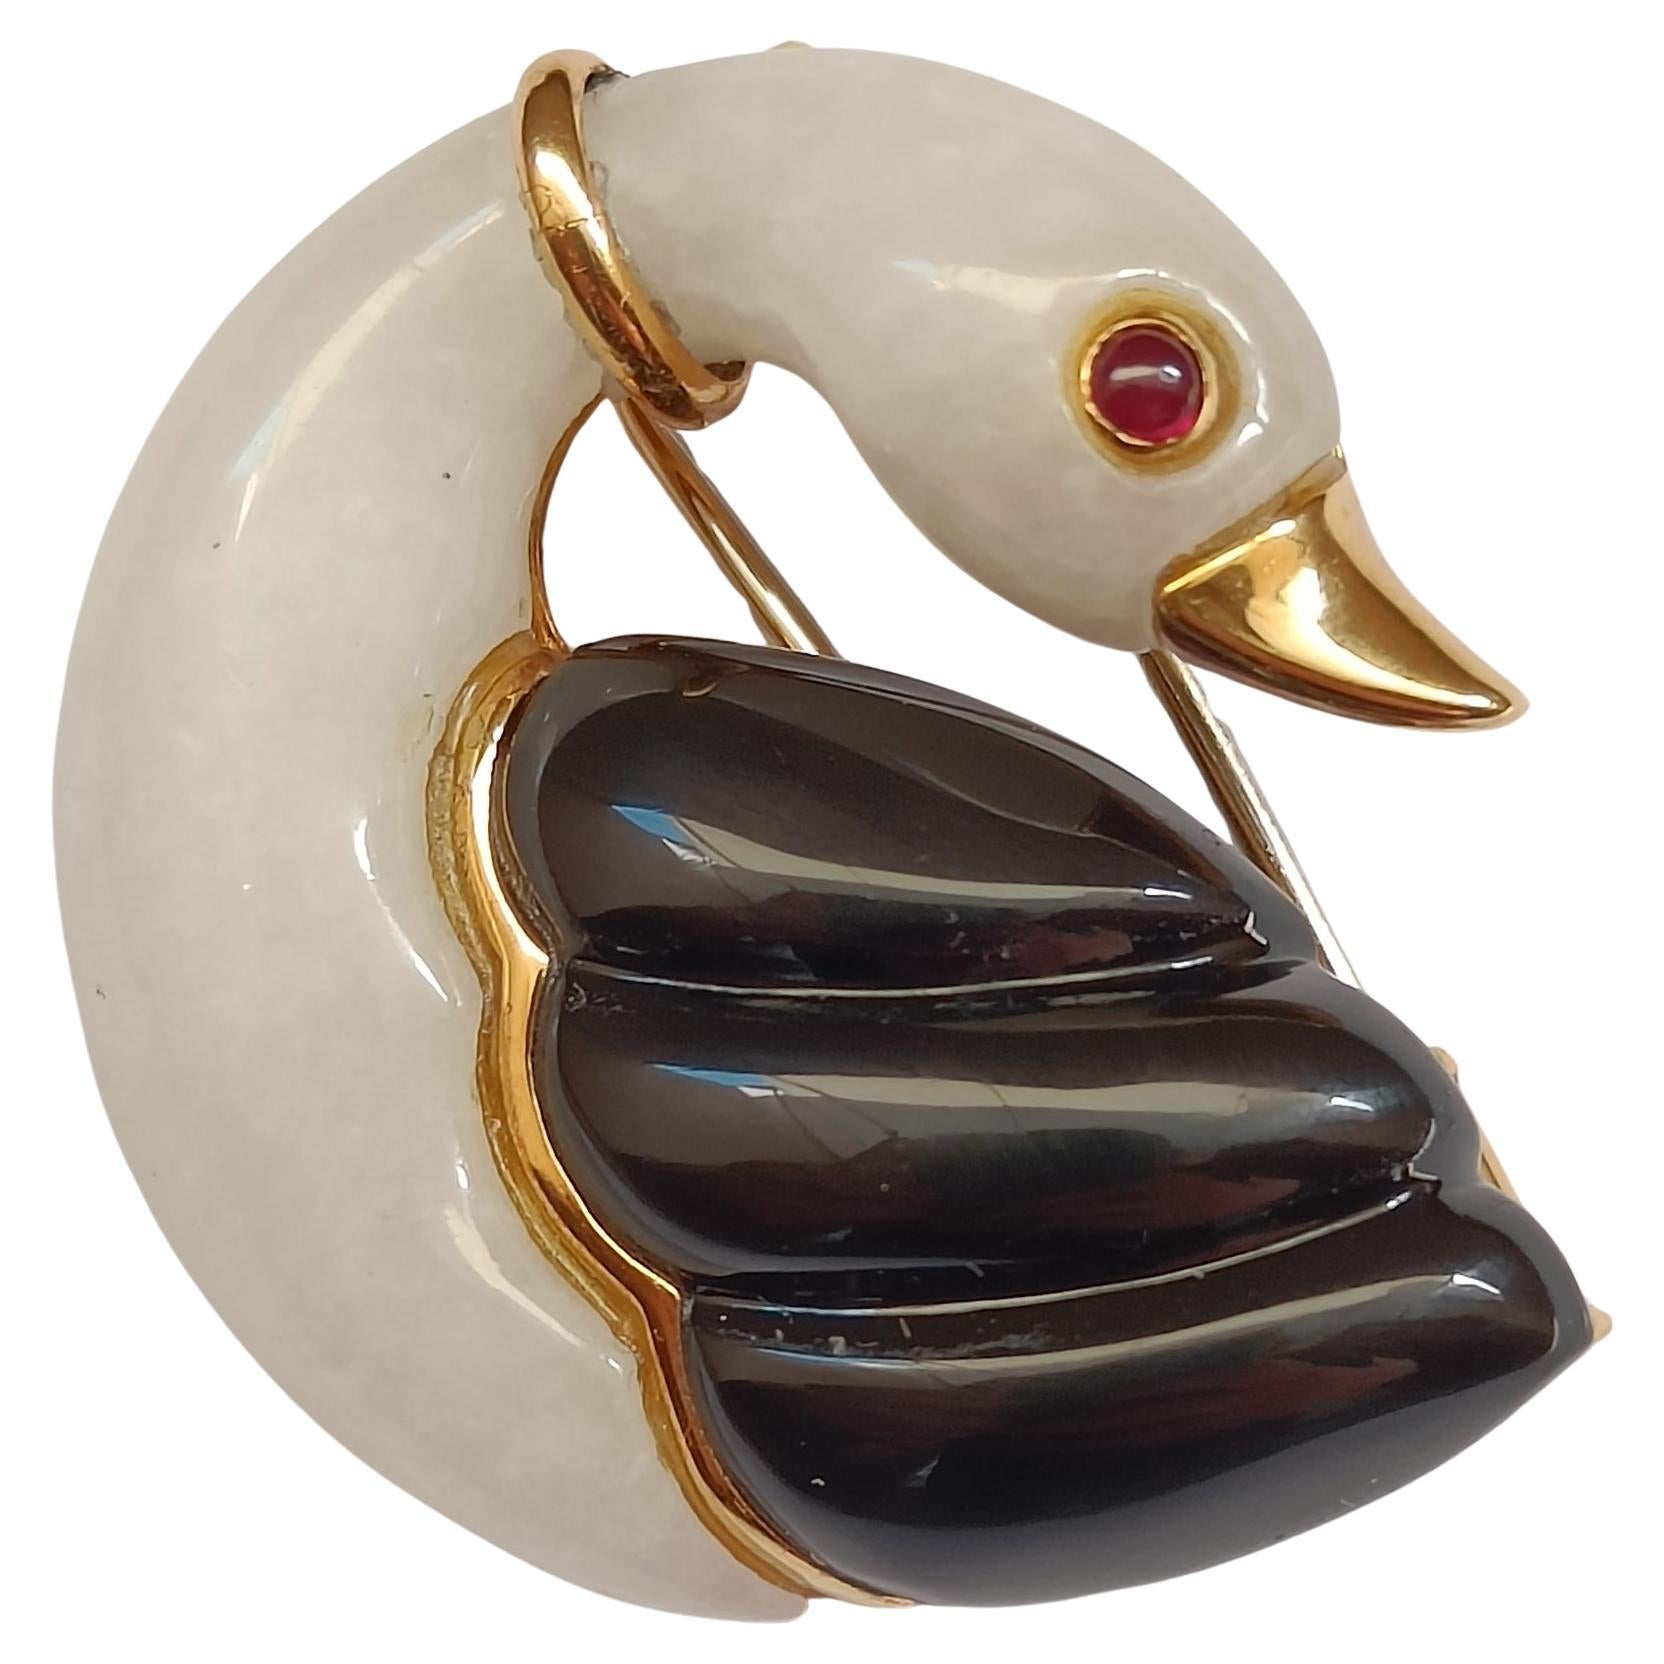 18k Gold Swan Brooch with Ruby, Chalcedony and Onyx - Vintage Animal Pin Brooch For Sale